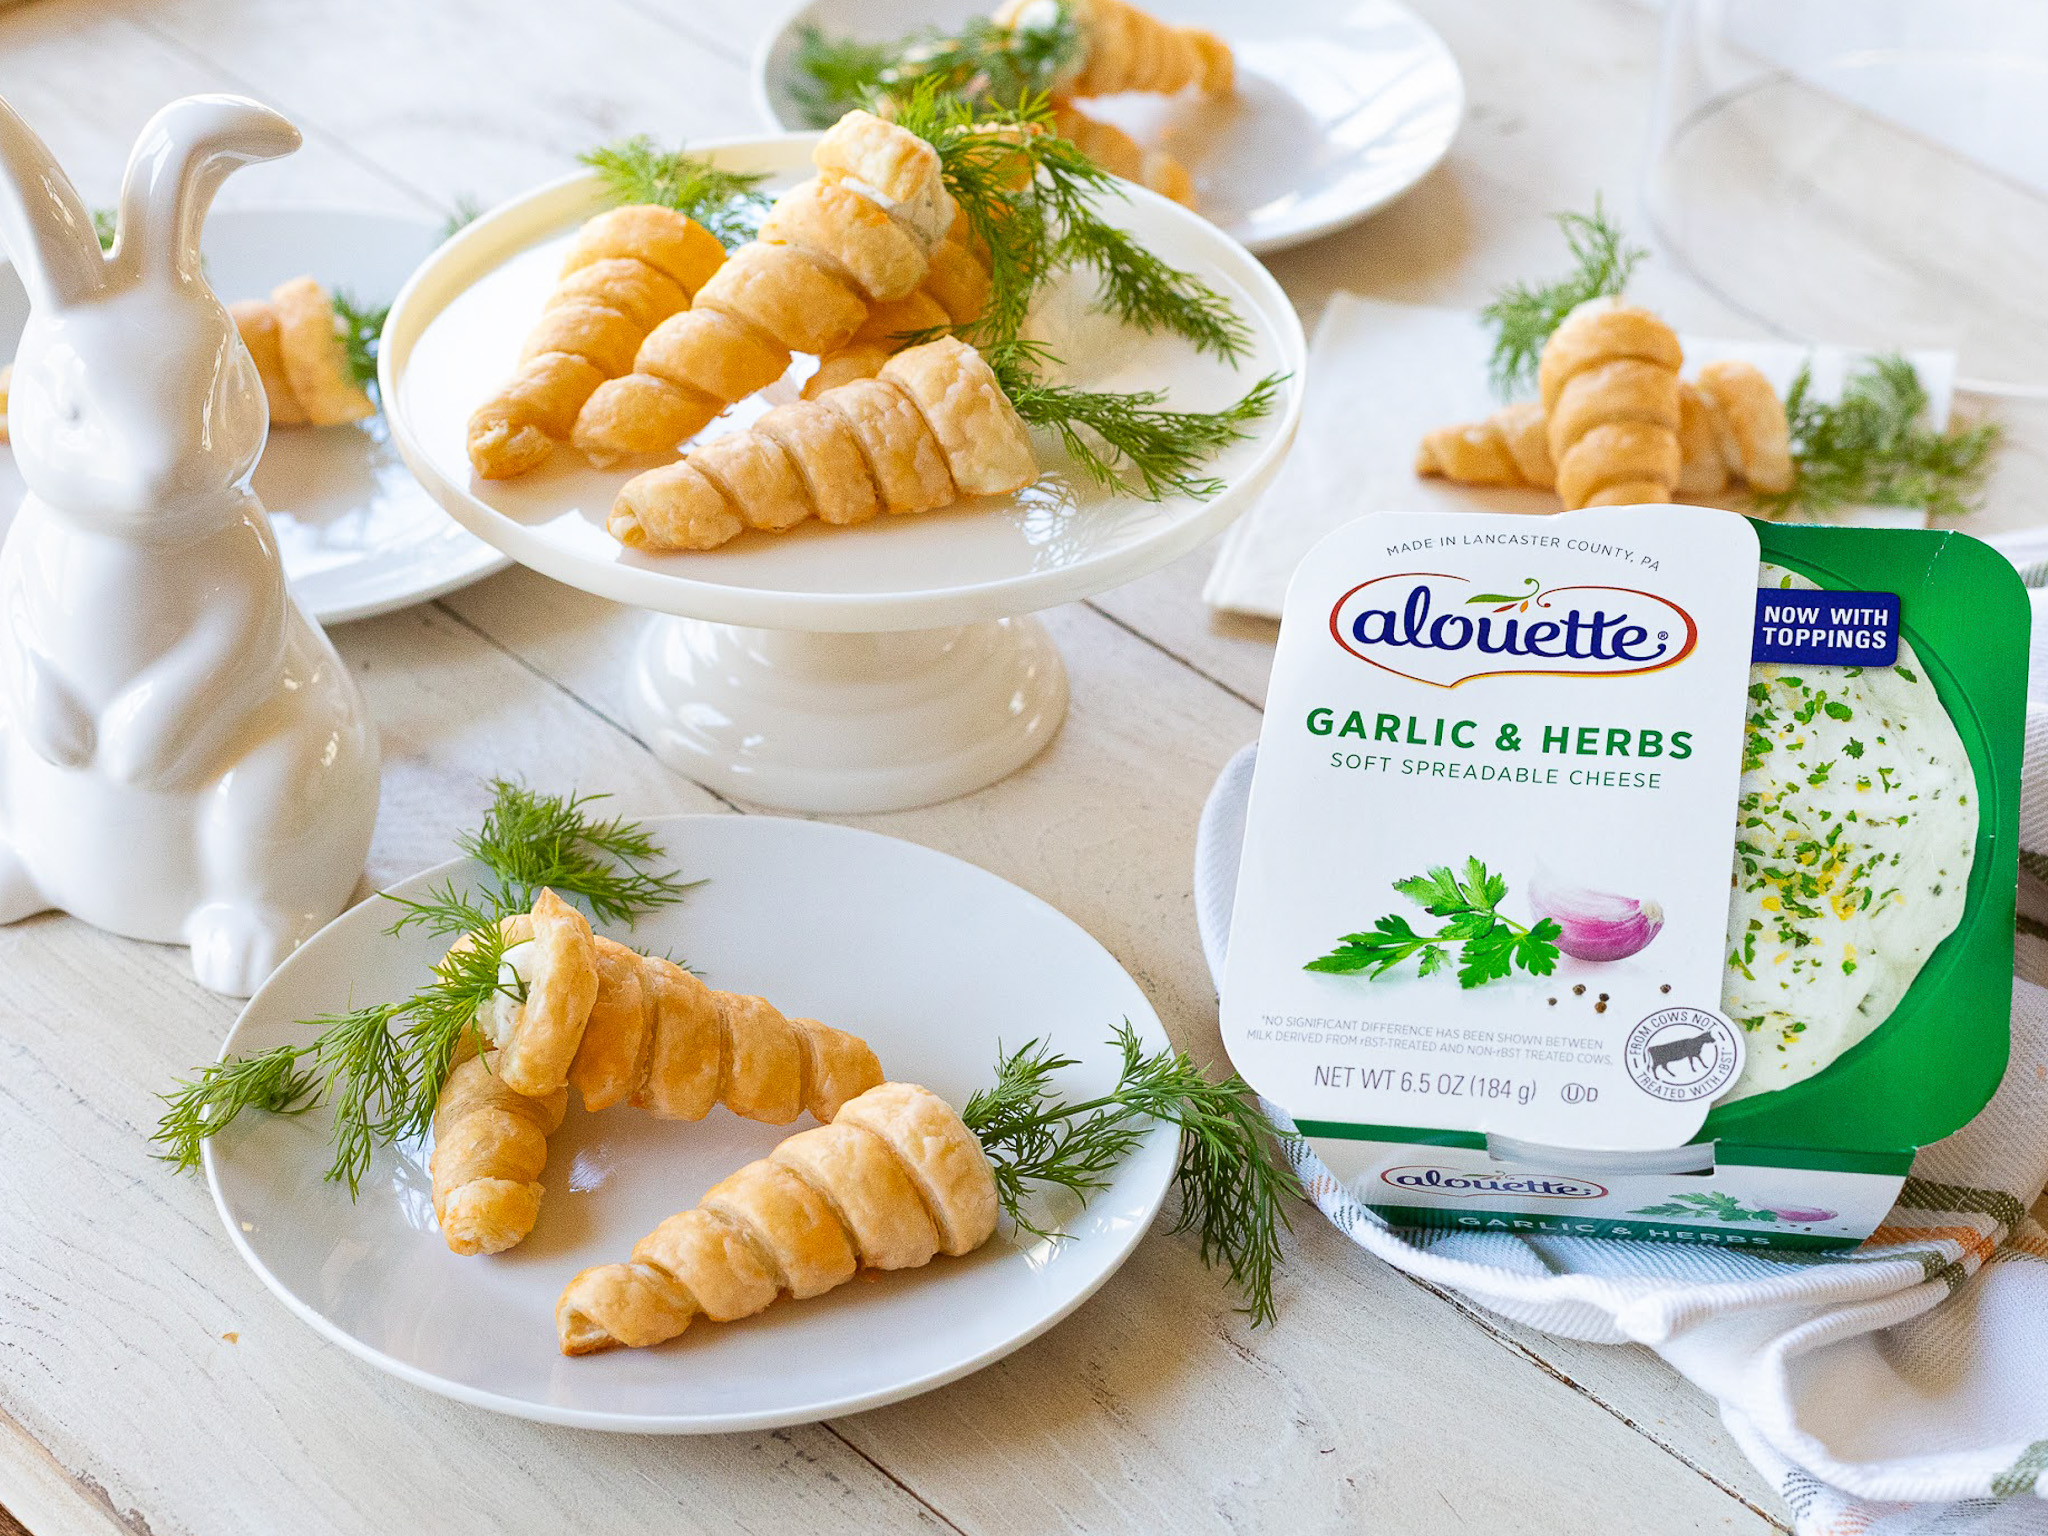 Grab Some Alouette Cheese For My Delicious Cheese Stuffed Puff Pastry Bites – A Perfect Easter Snack!